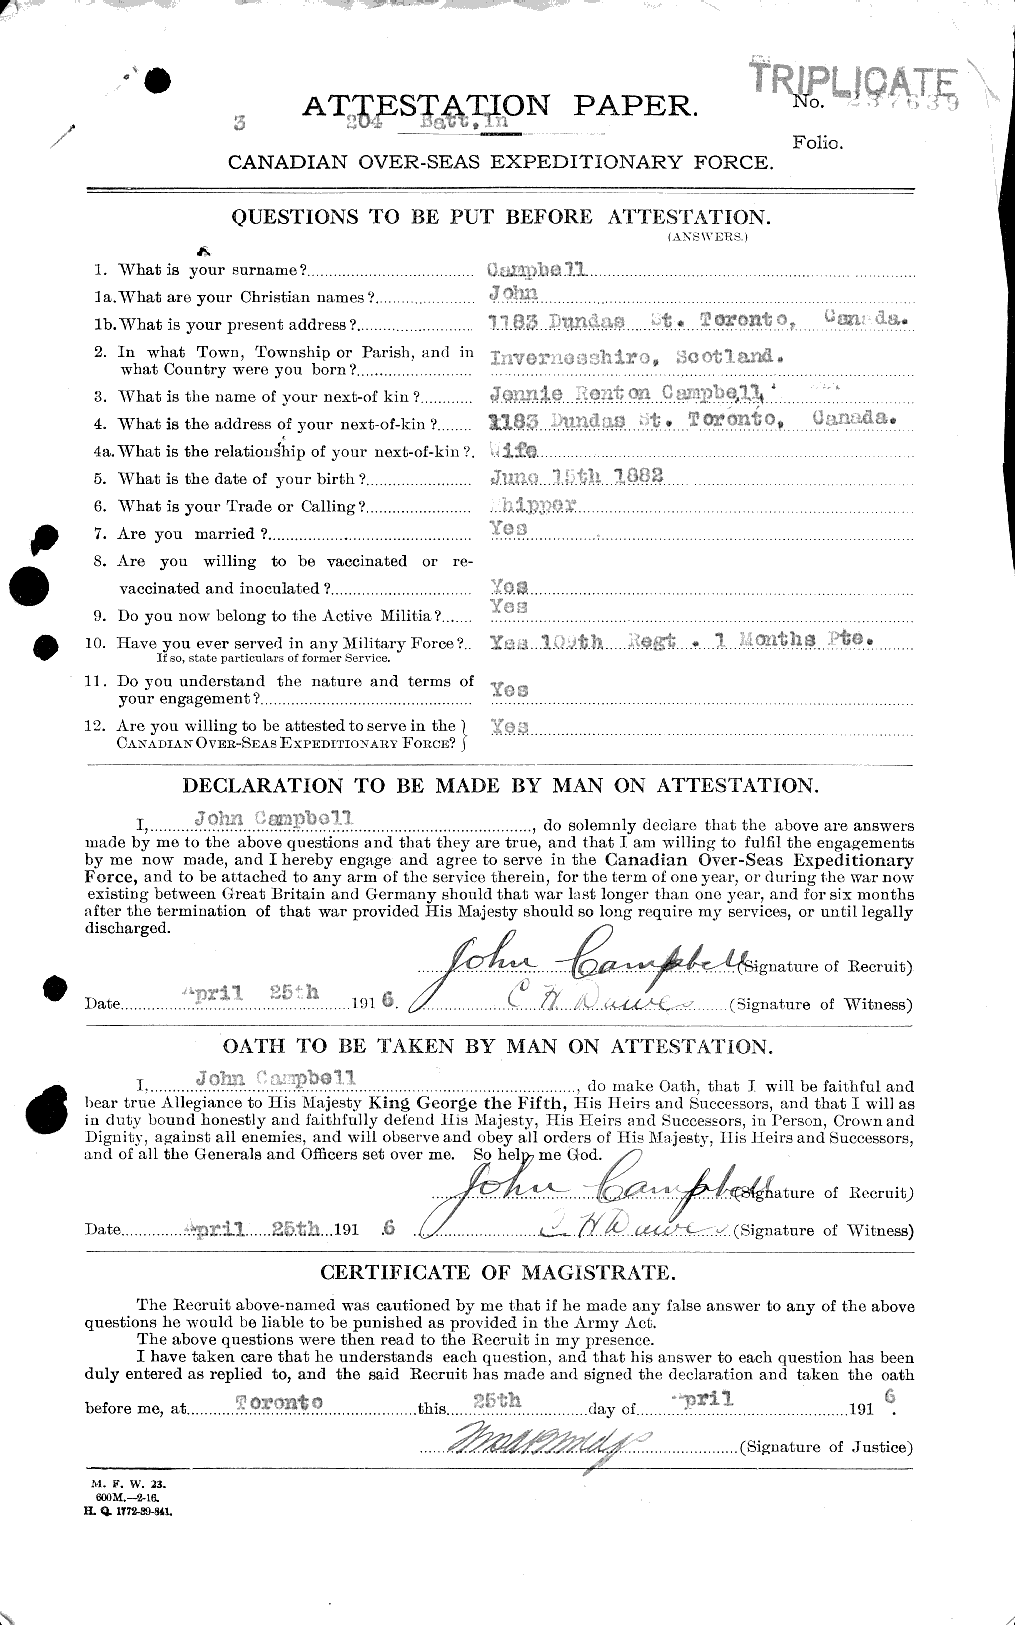 Personnel Records of the First World War - CEF 006821a